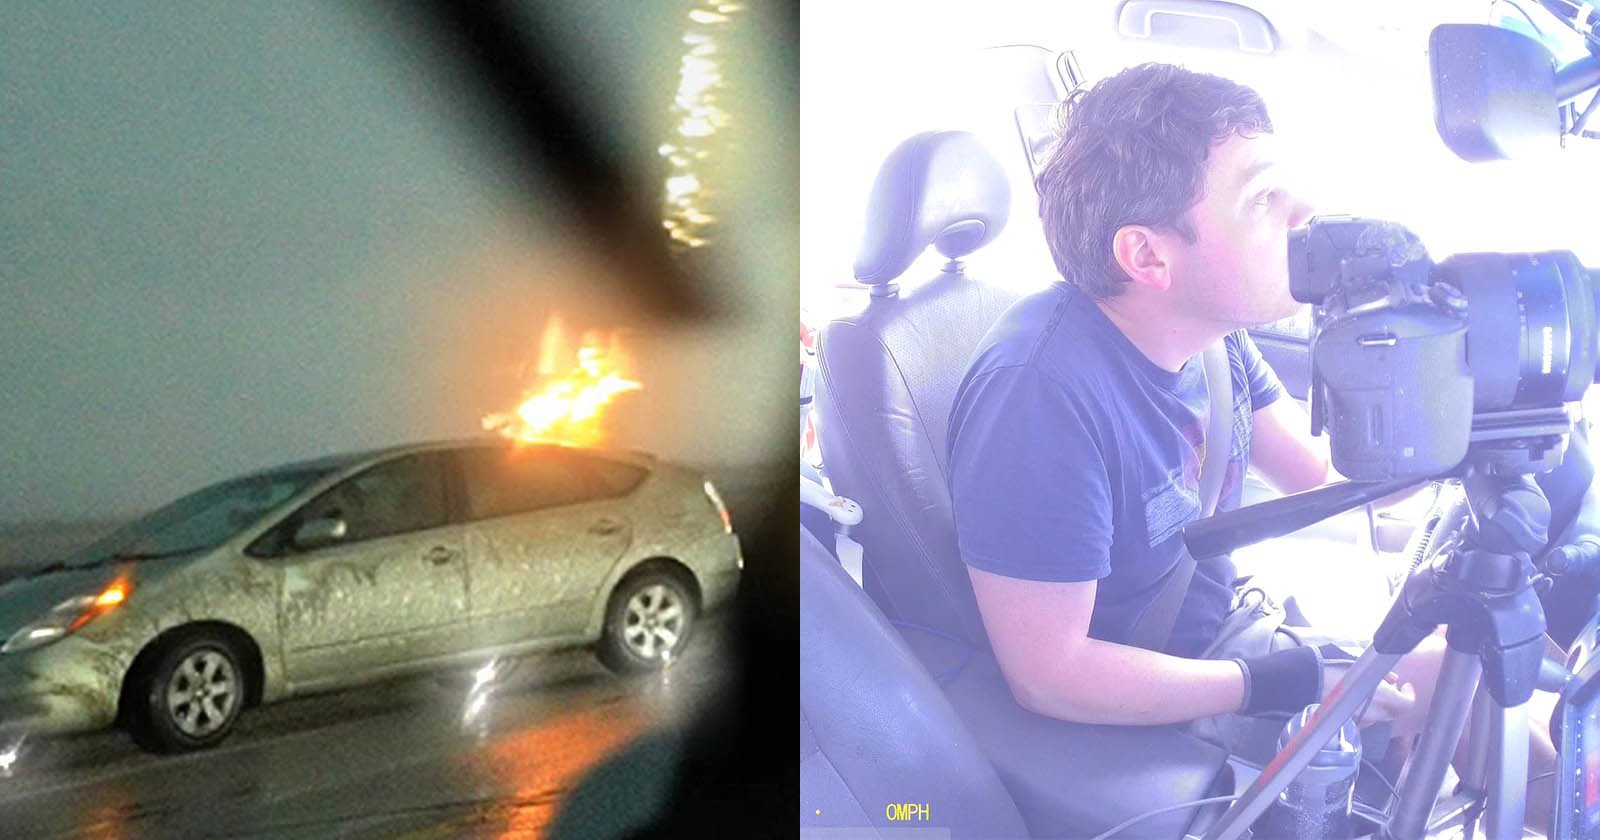 Storm Chasing Photographers Car Struck By Lightning On Camera